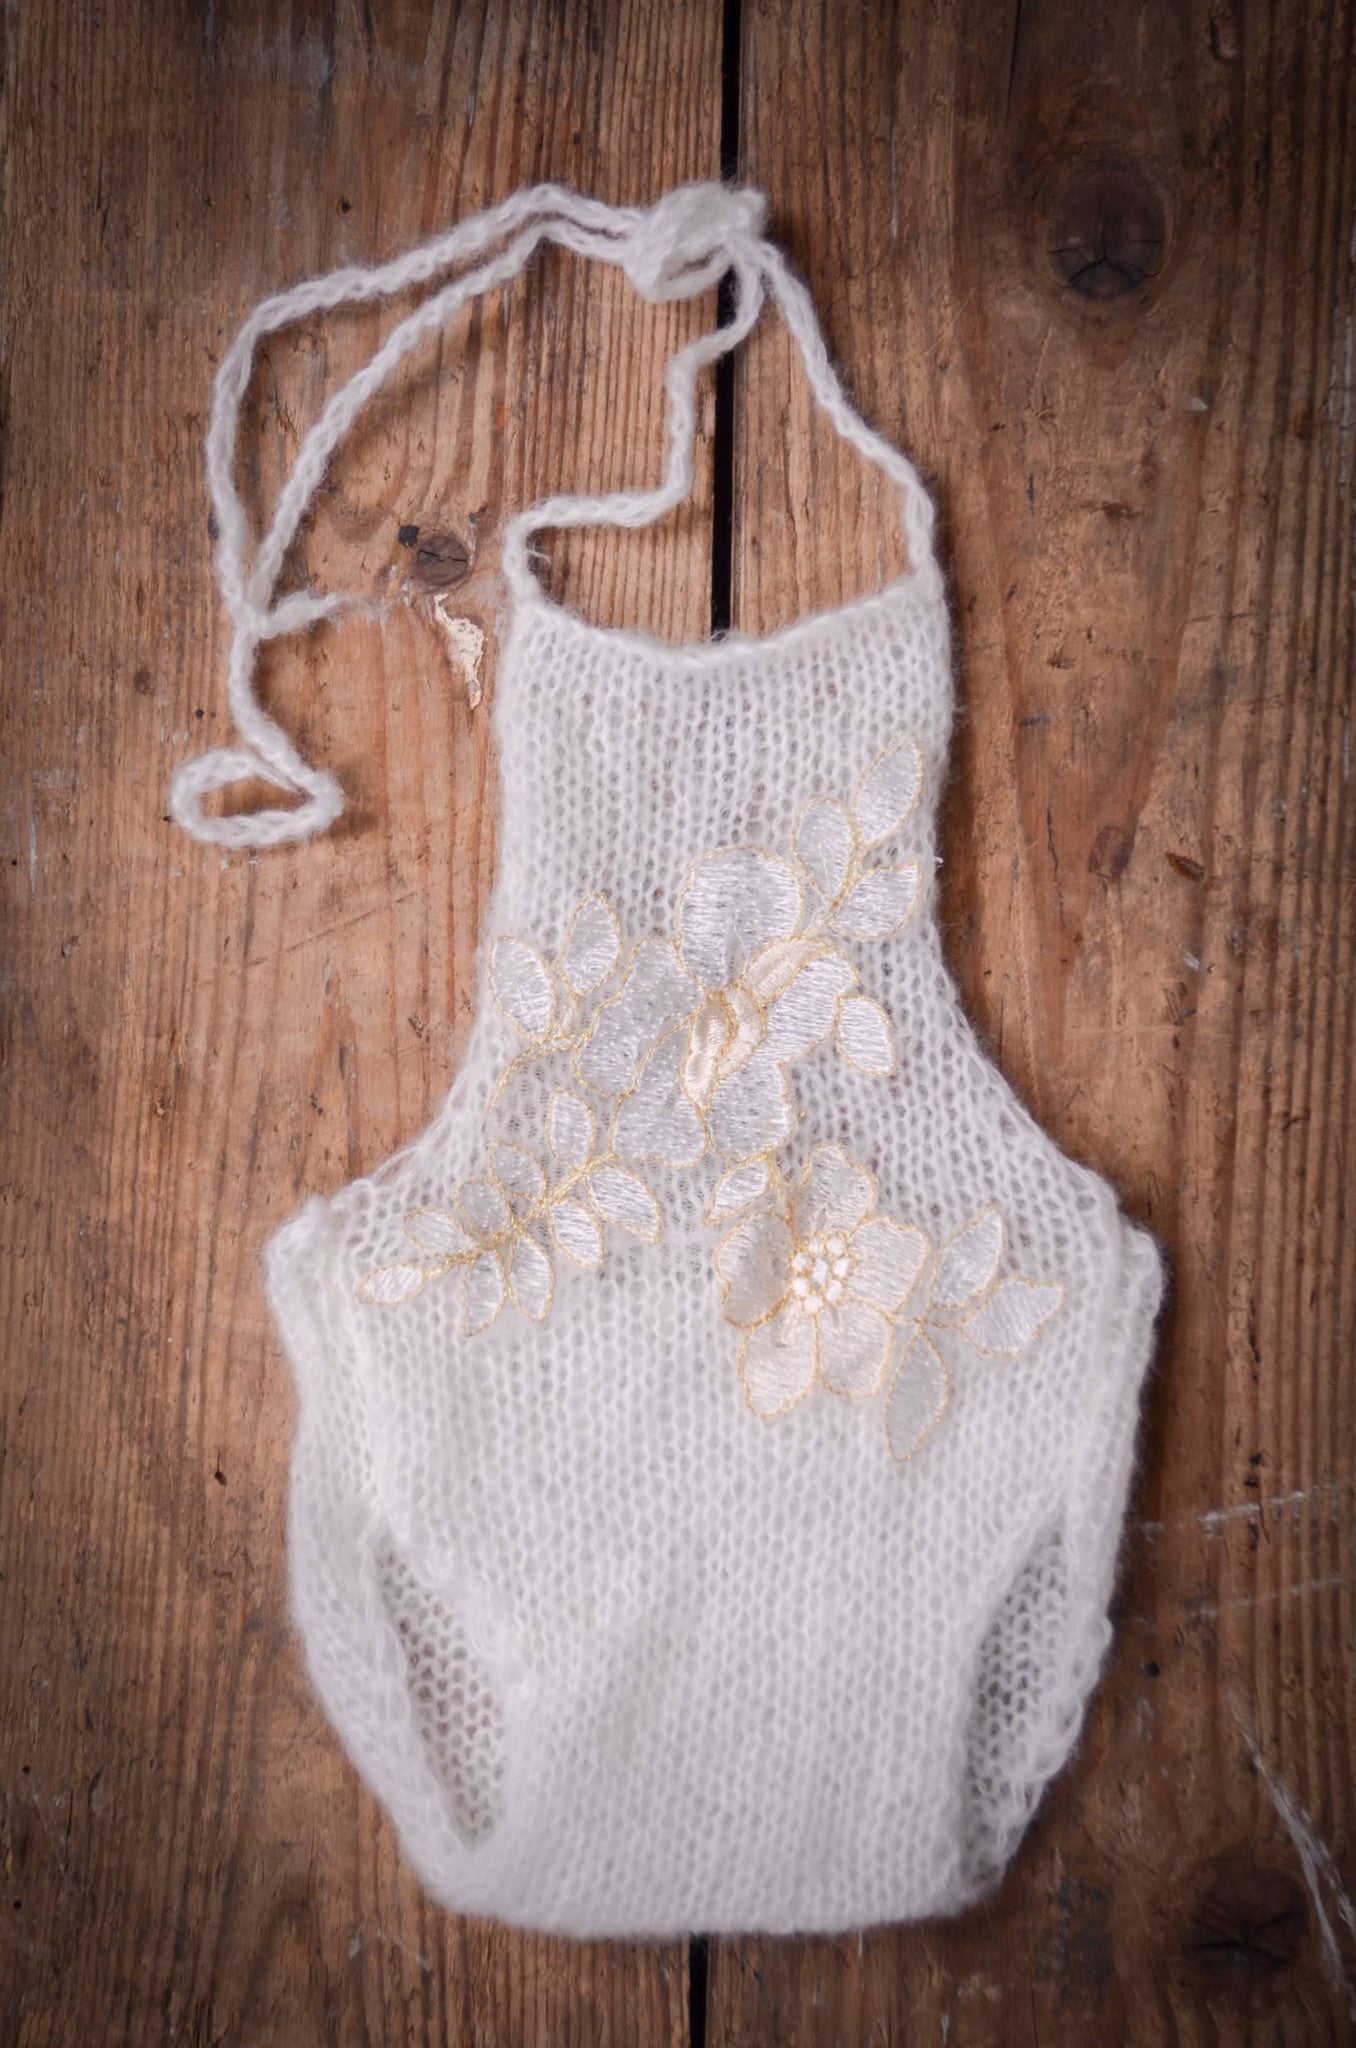 Mohair Knit Romper with Flowers - Milk White-Newborn Photography Props